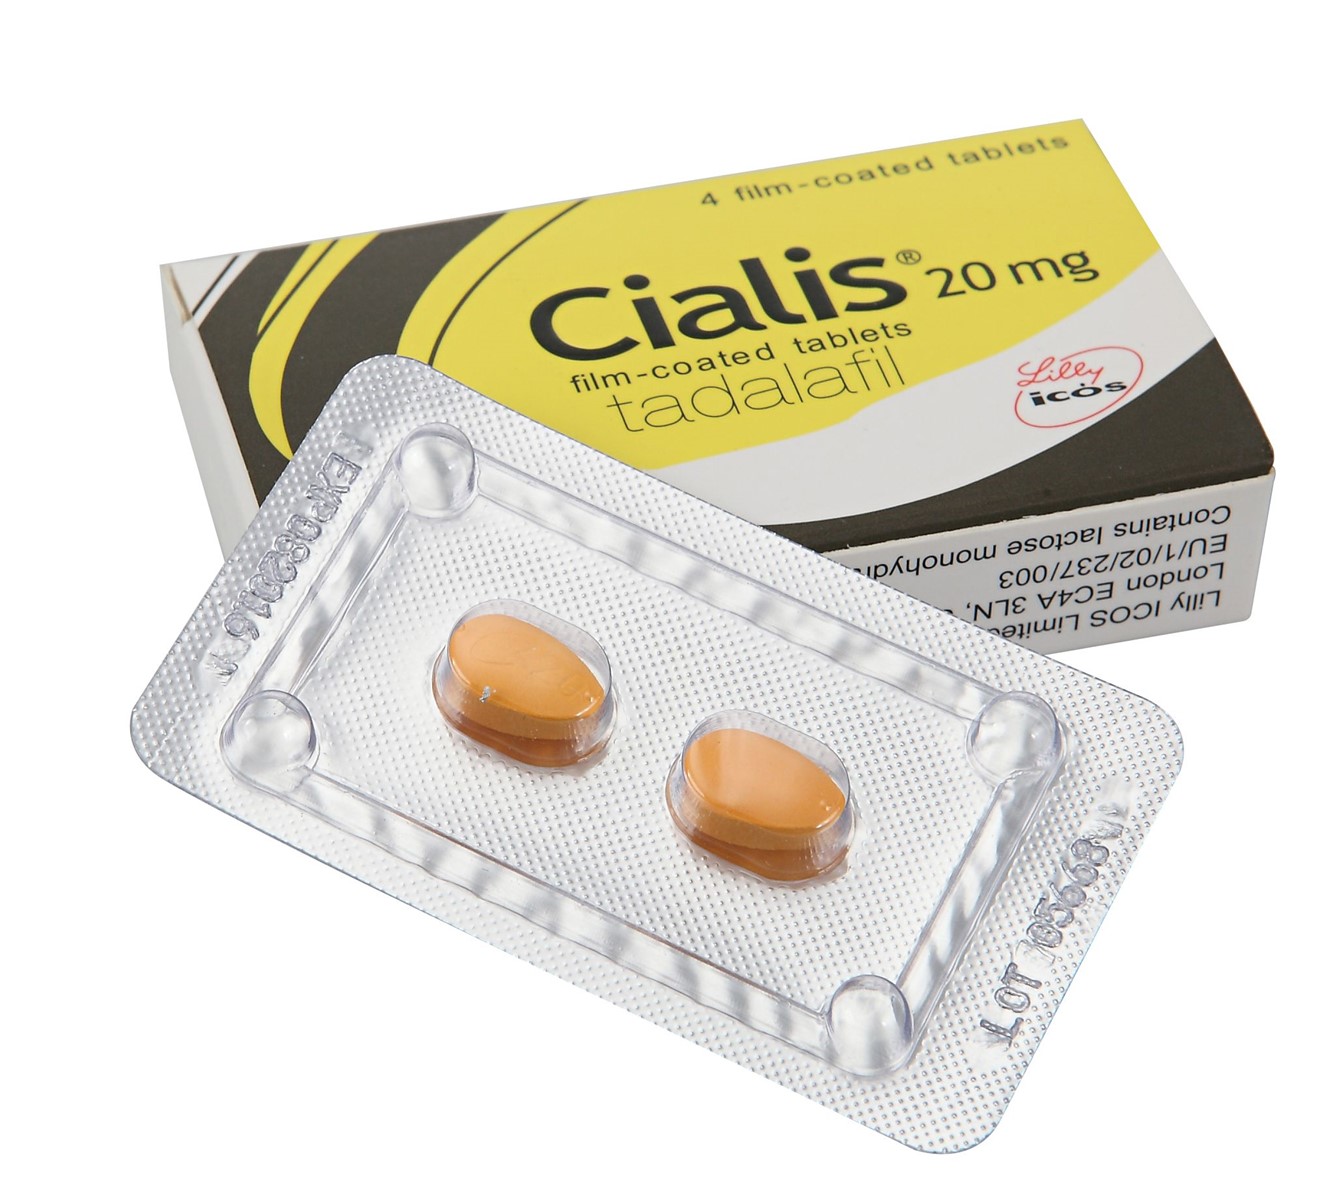 Cialis Wholesale Supplier 4 Film-Coated Tablets Tadalafil 20mg from ...